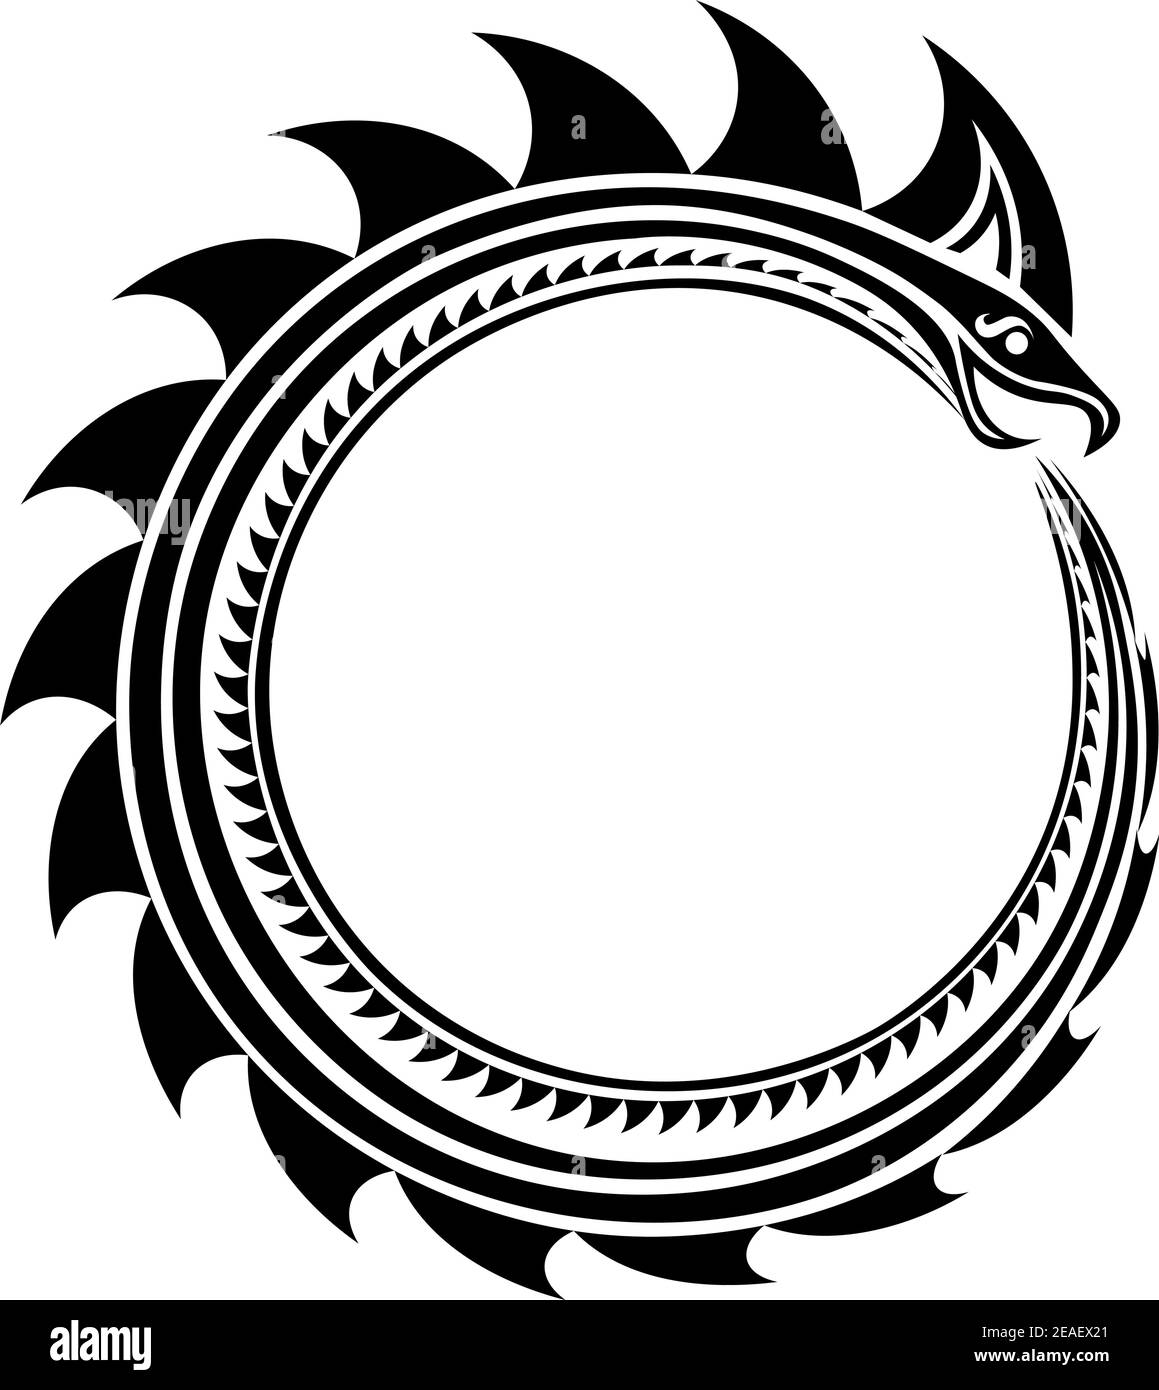 isolated black ouroboros snake in tribal celtic or viking style Stock Vector